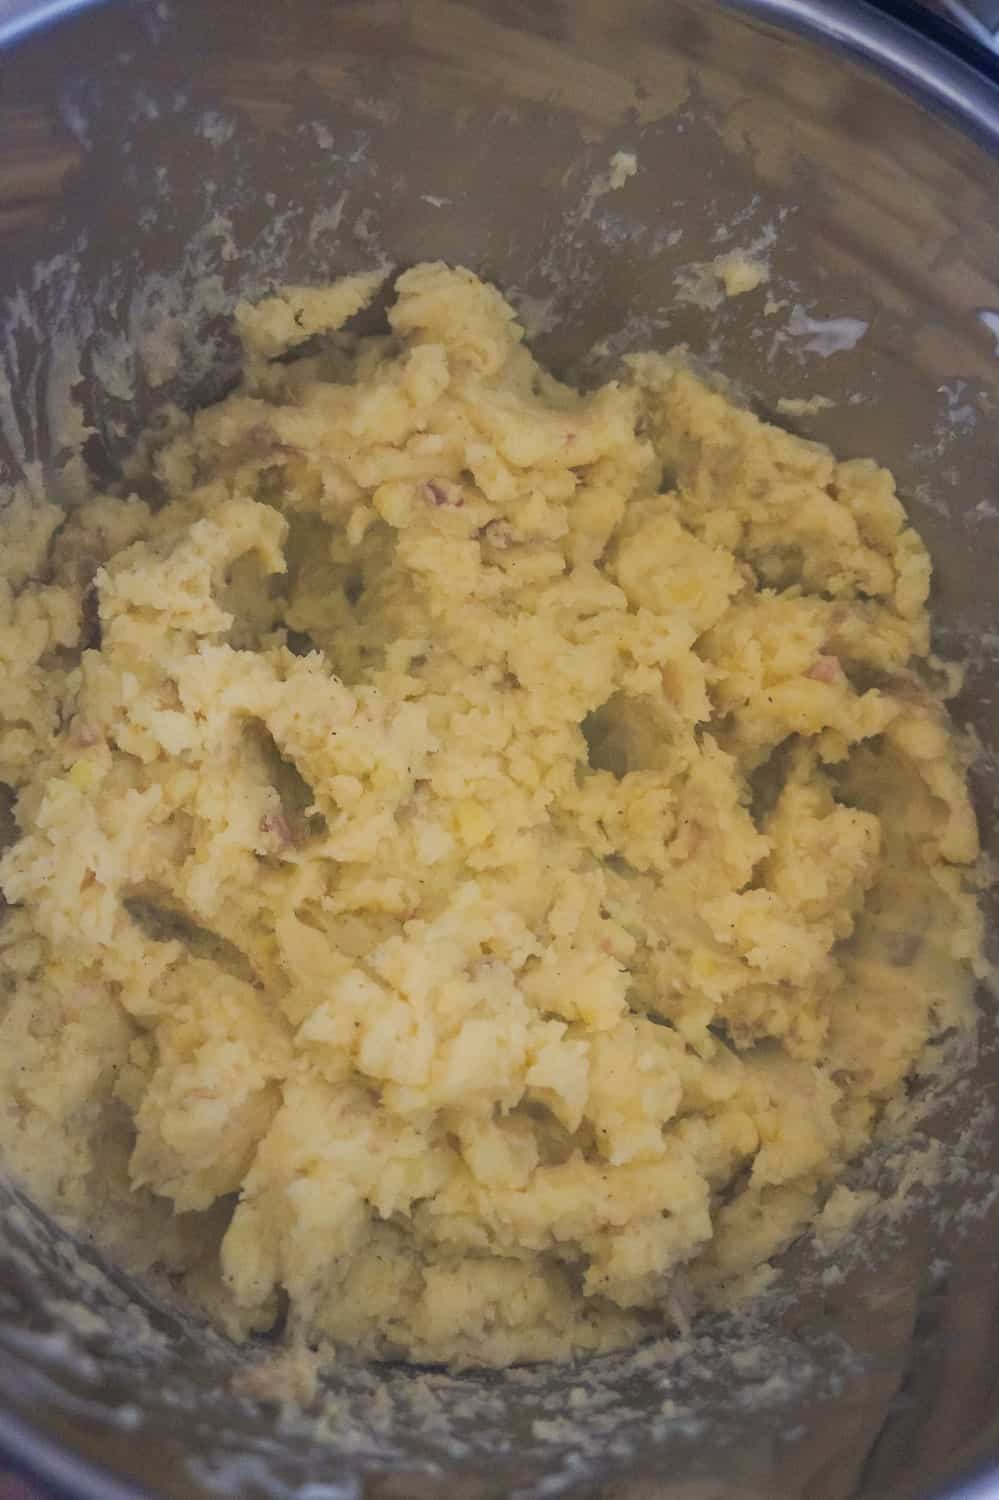 mashed potatoes in an Instant Pot